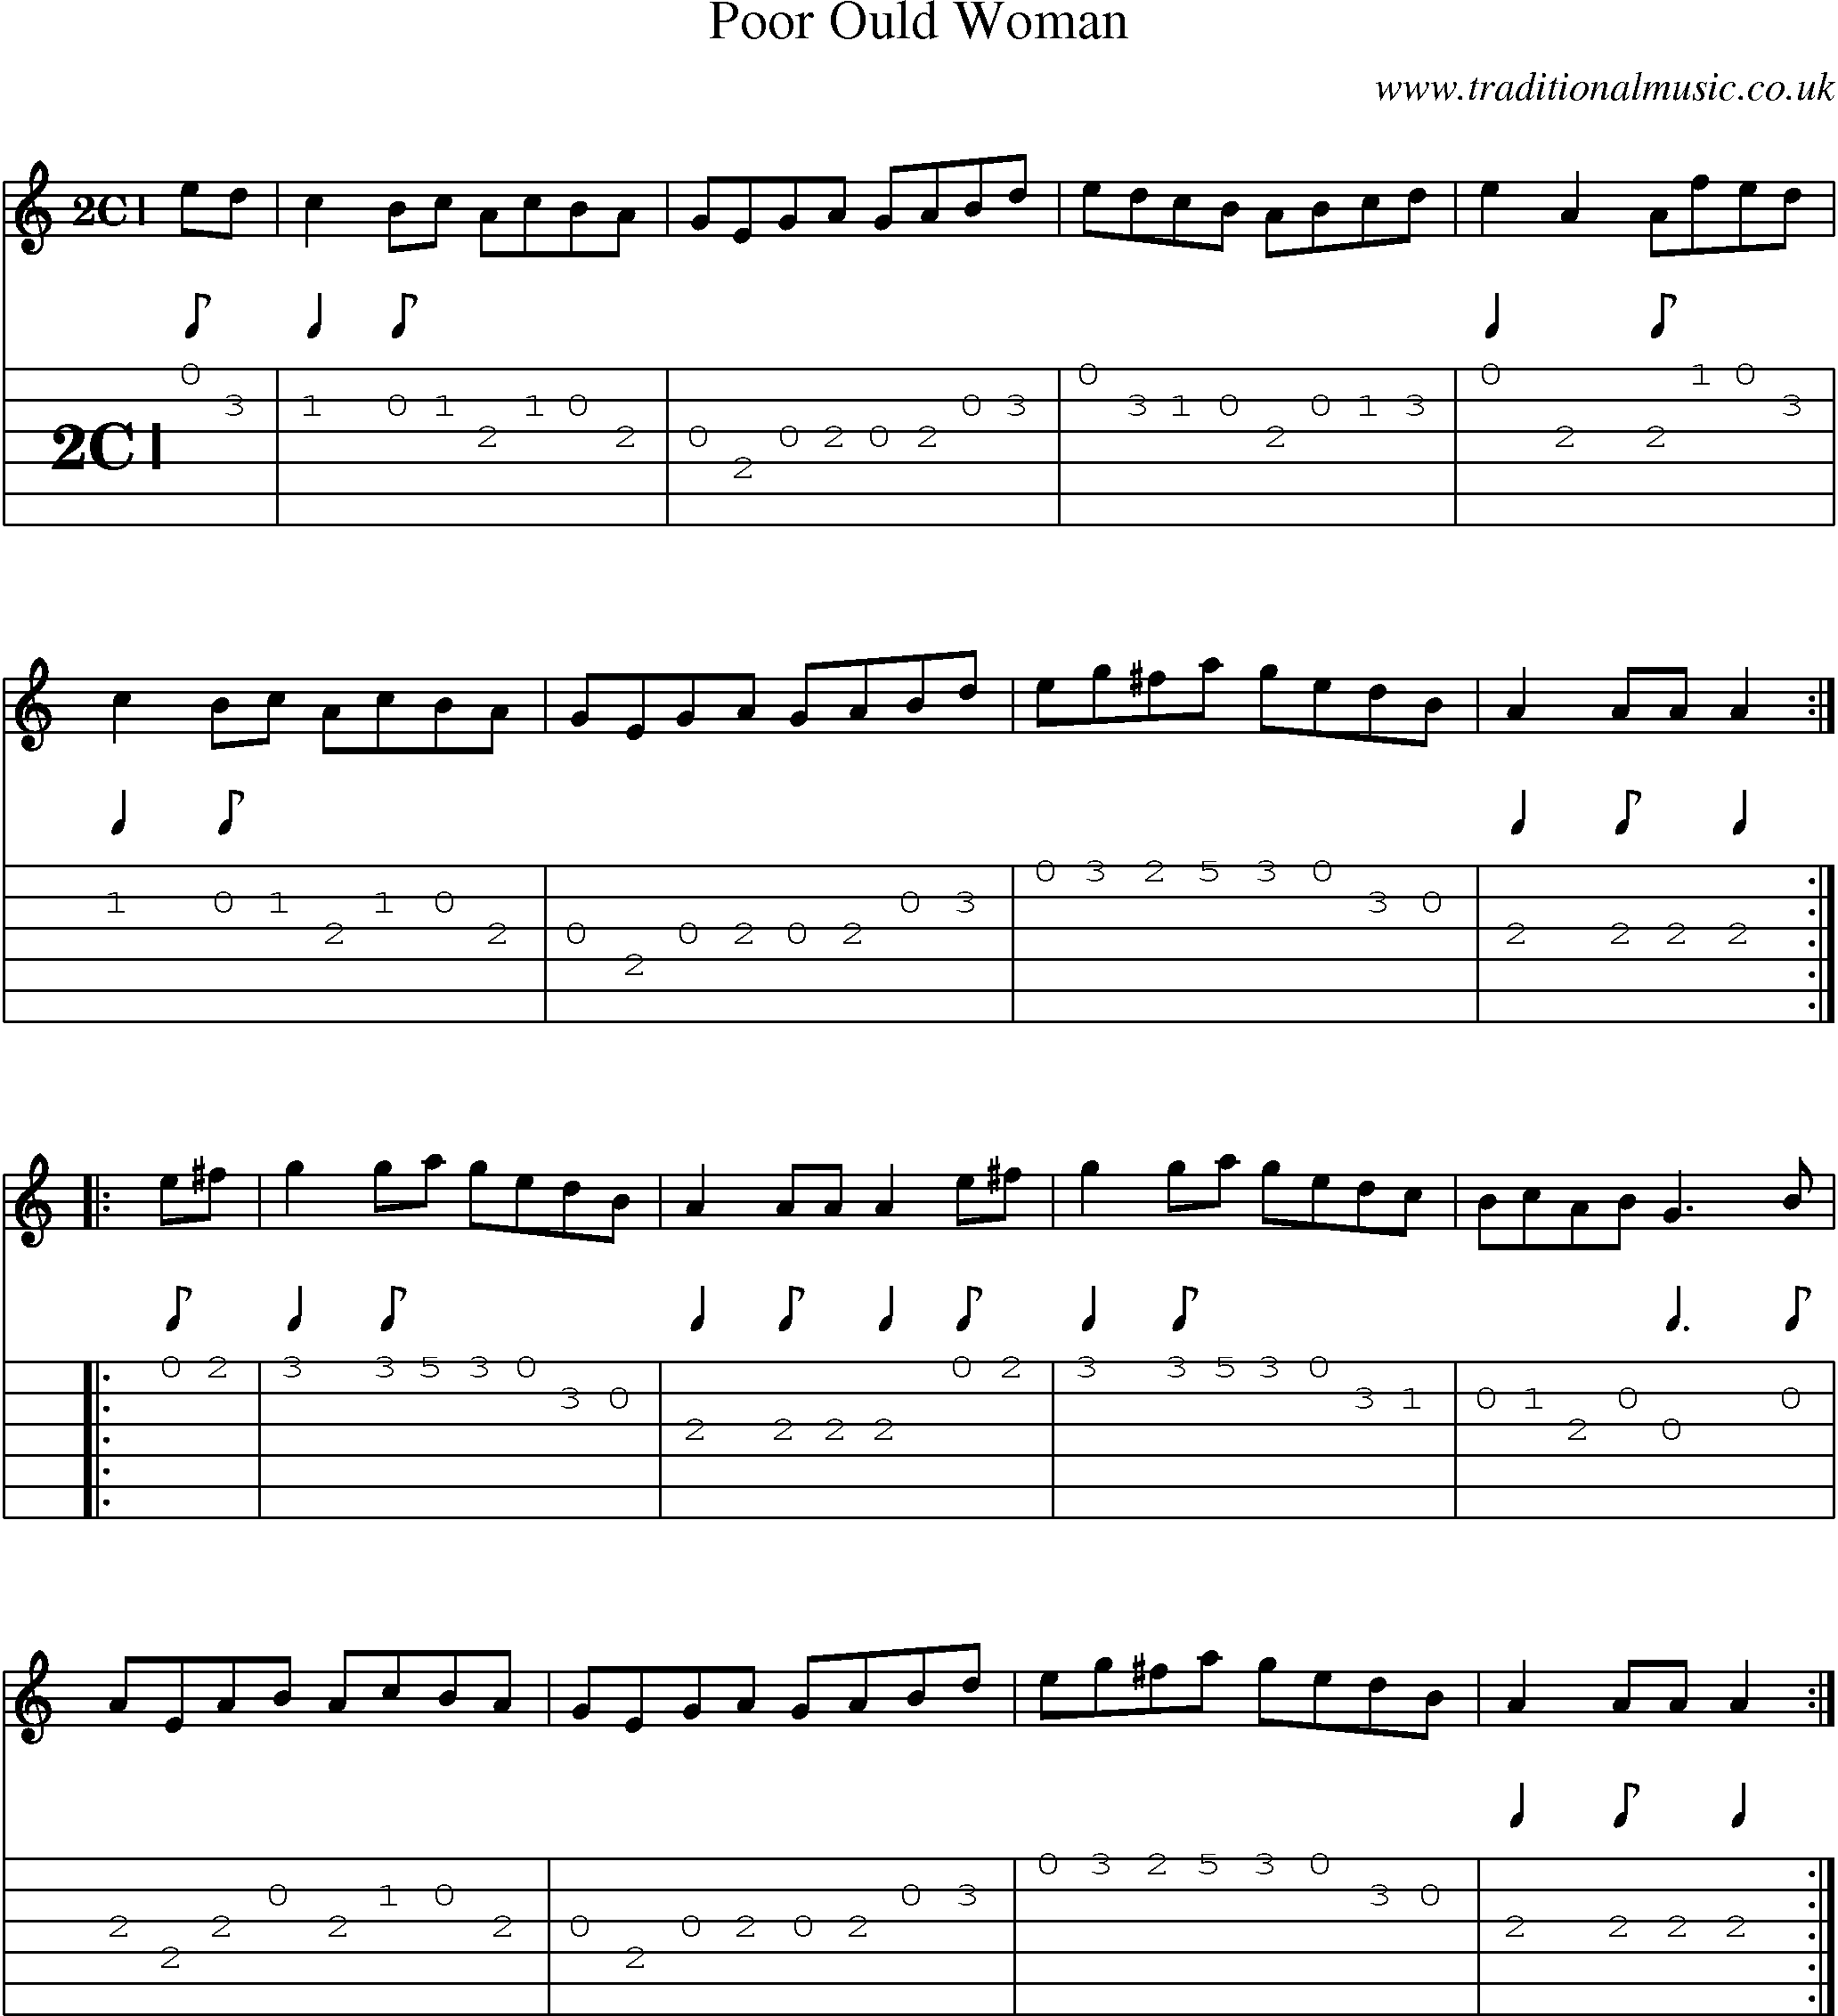 Music Score and Guitar Tabs for Poor Ould Woman